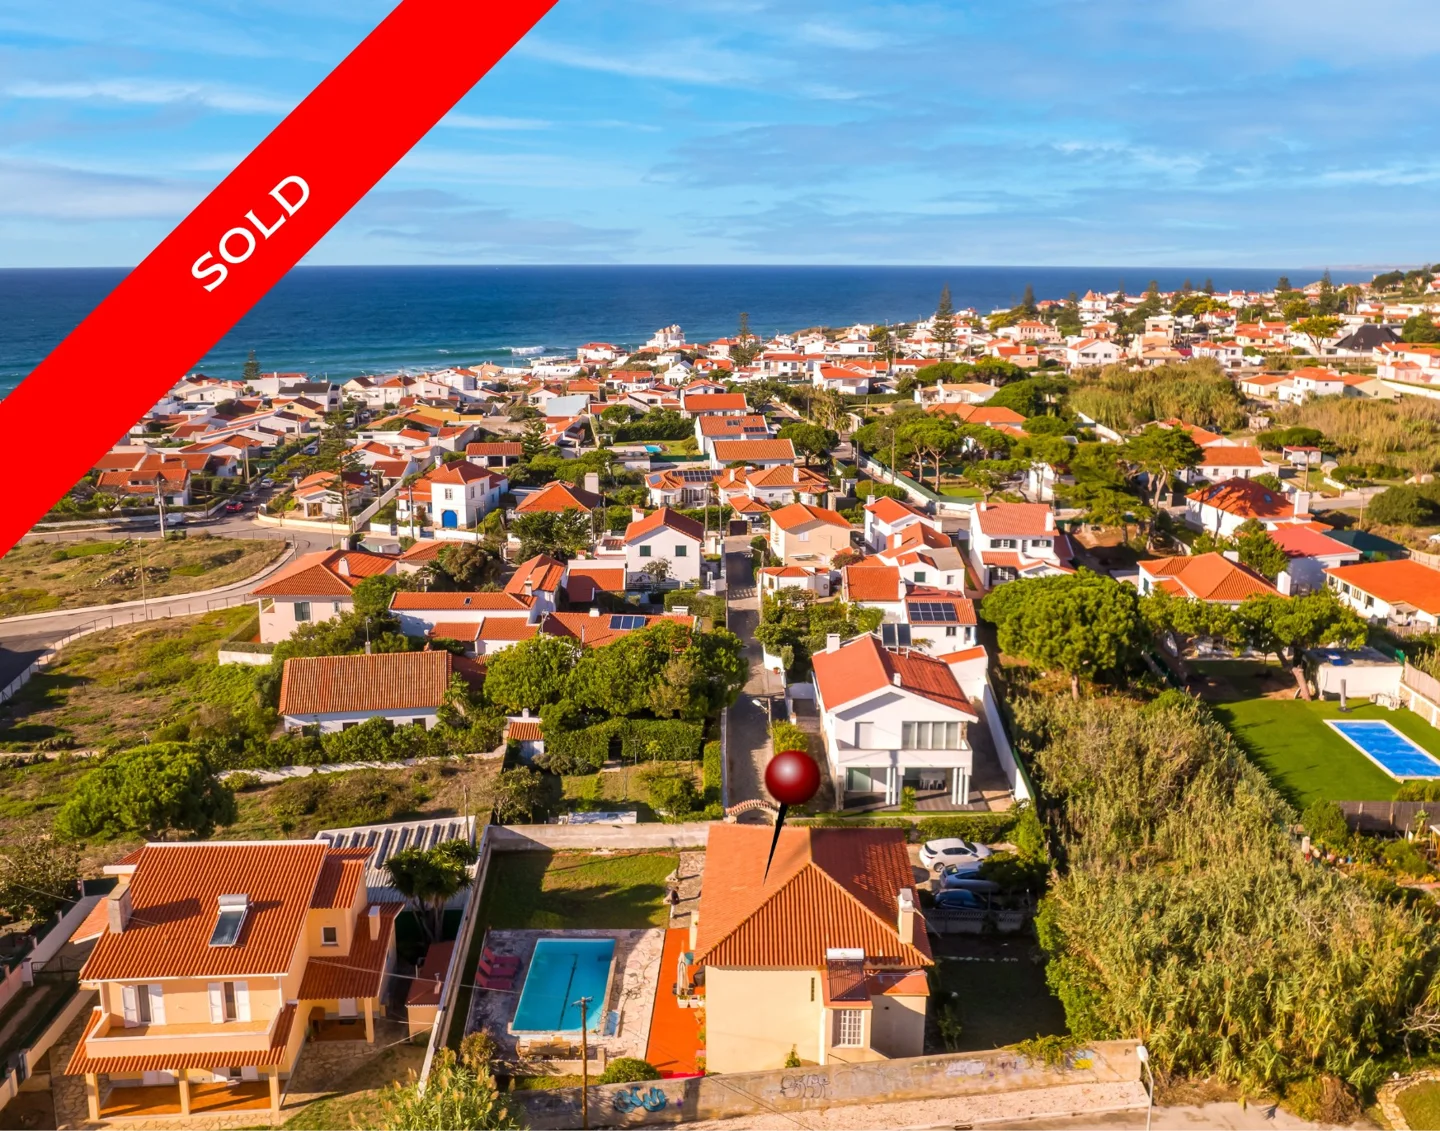 T11, 7 Bedroom, 2 Story House, 500m from beach: The Perfect Investment!